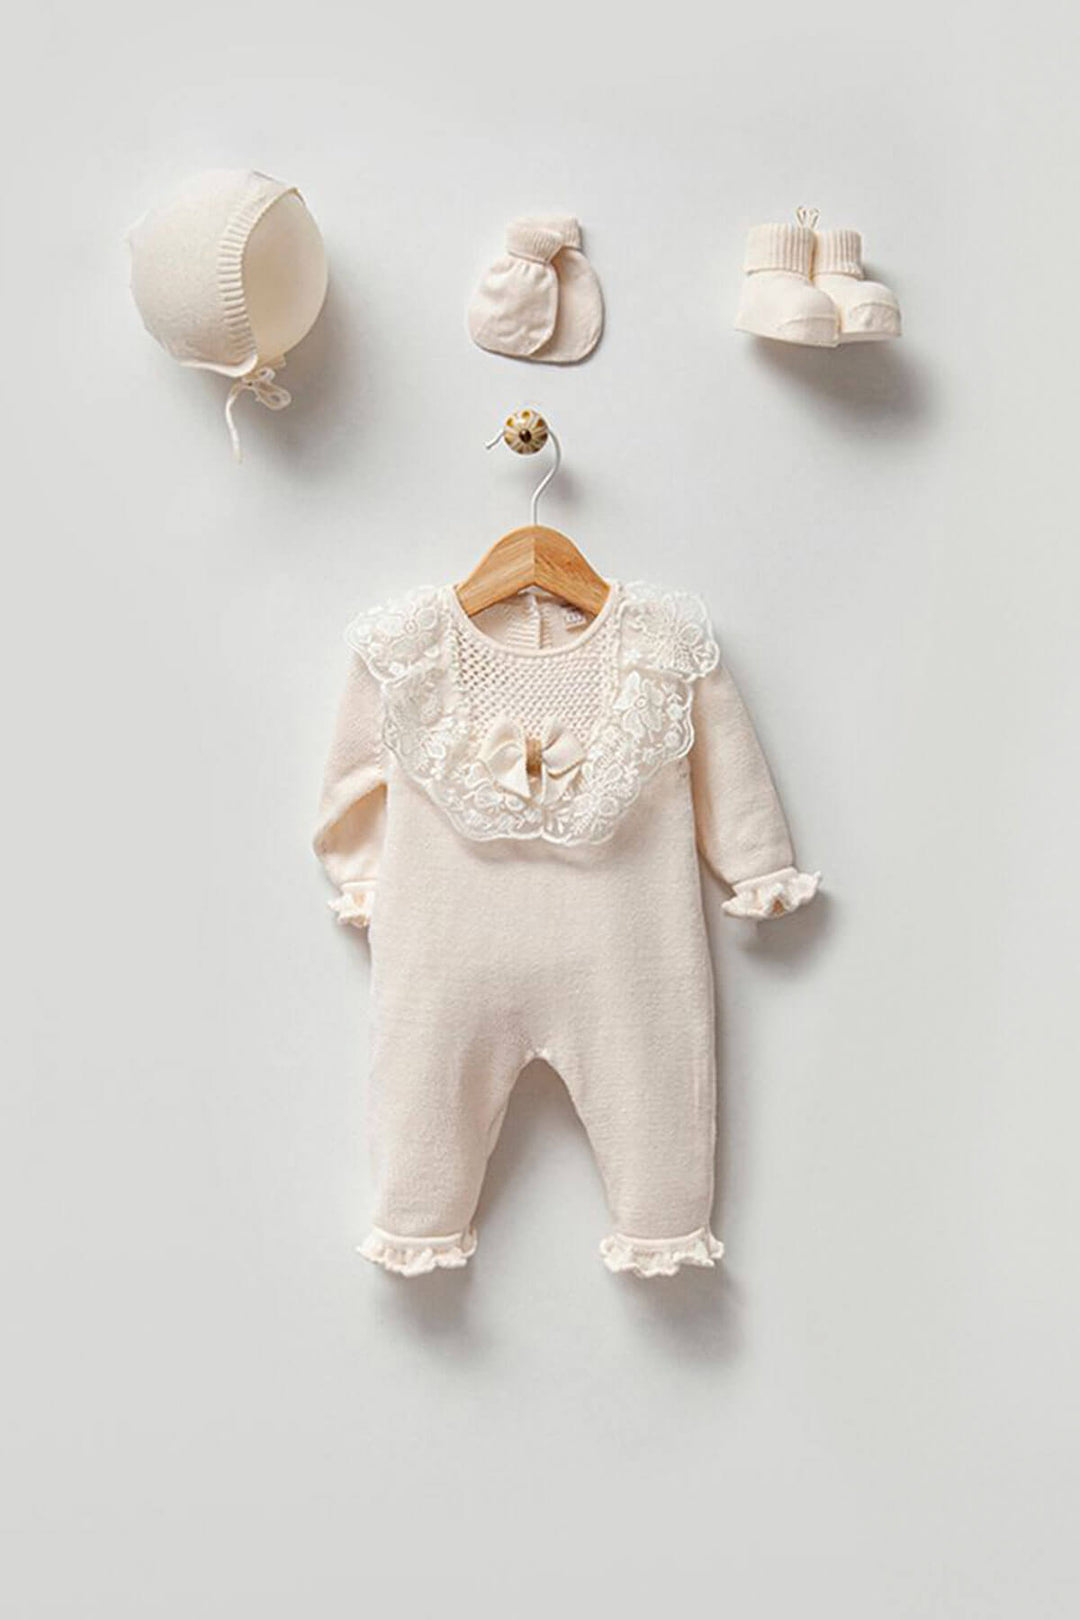 newborn knitwear hospital exit outfit baby